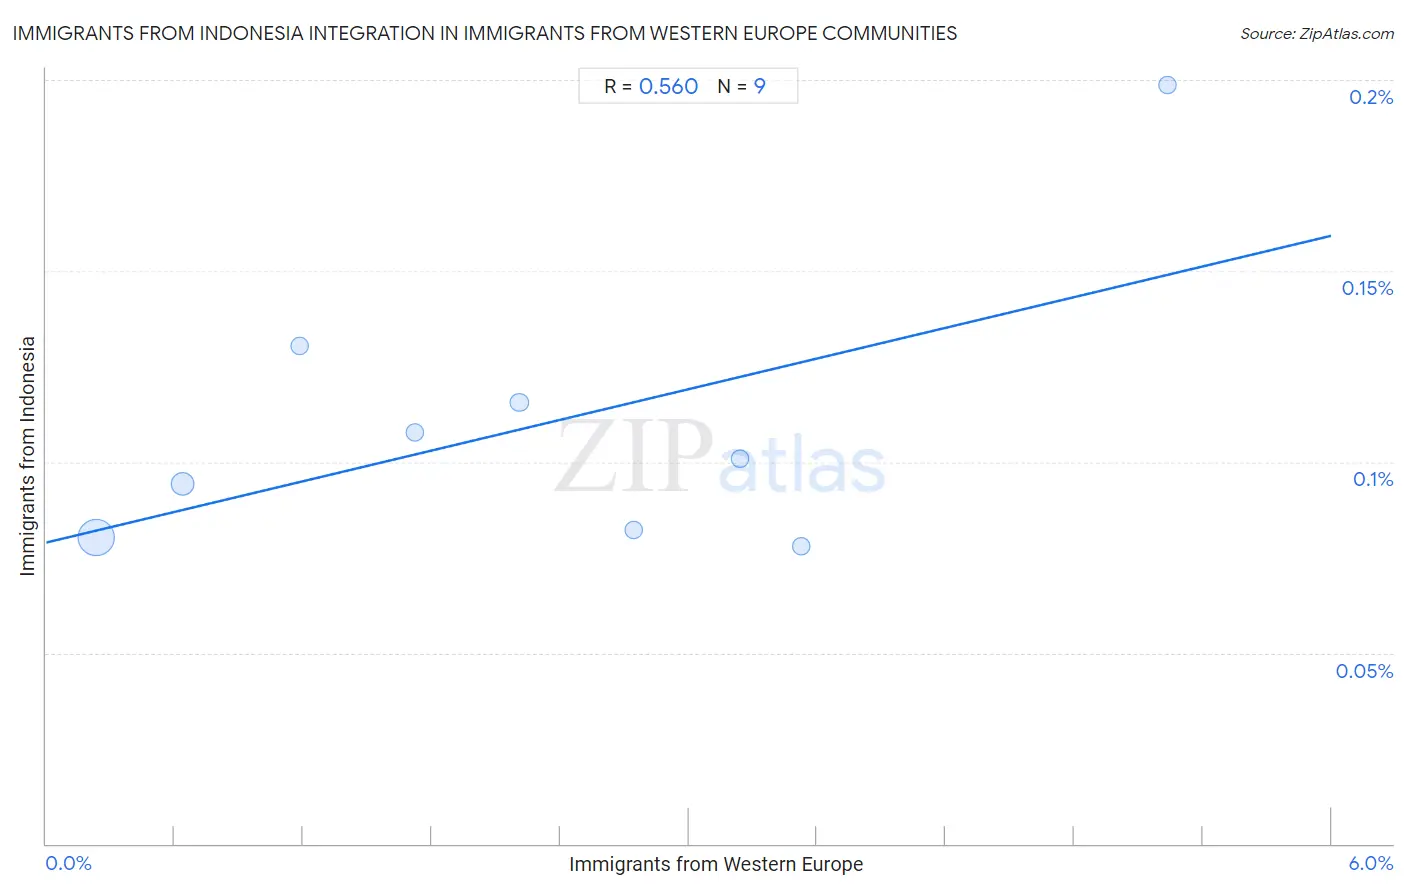 Immigrants from Western Europe Integration in Immigrants from Indonesia Communities